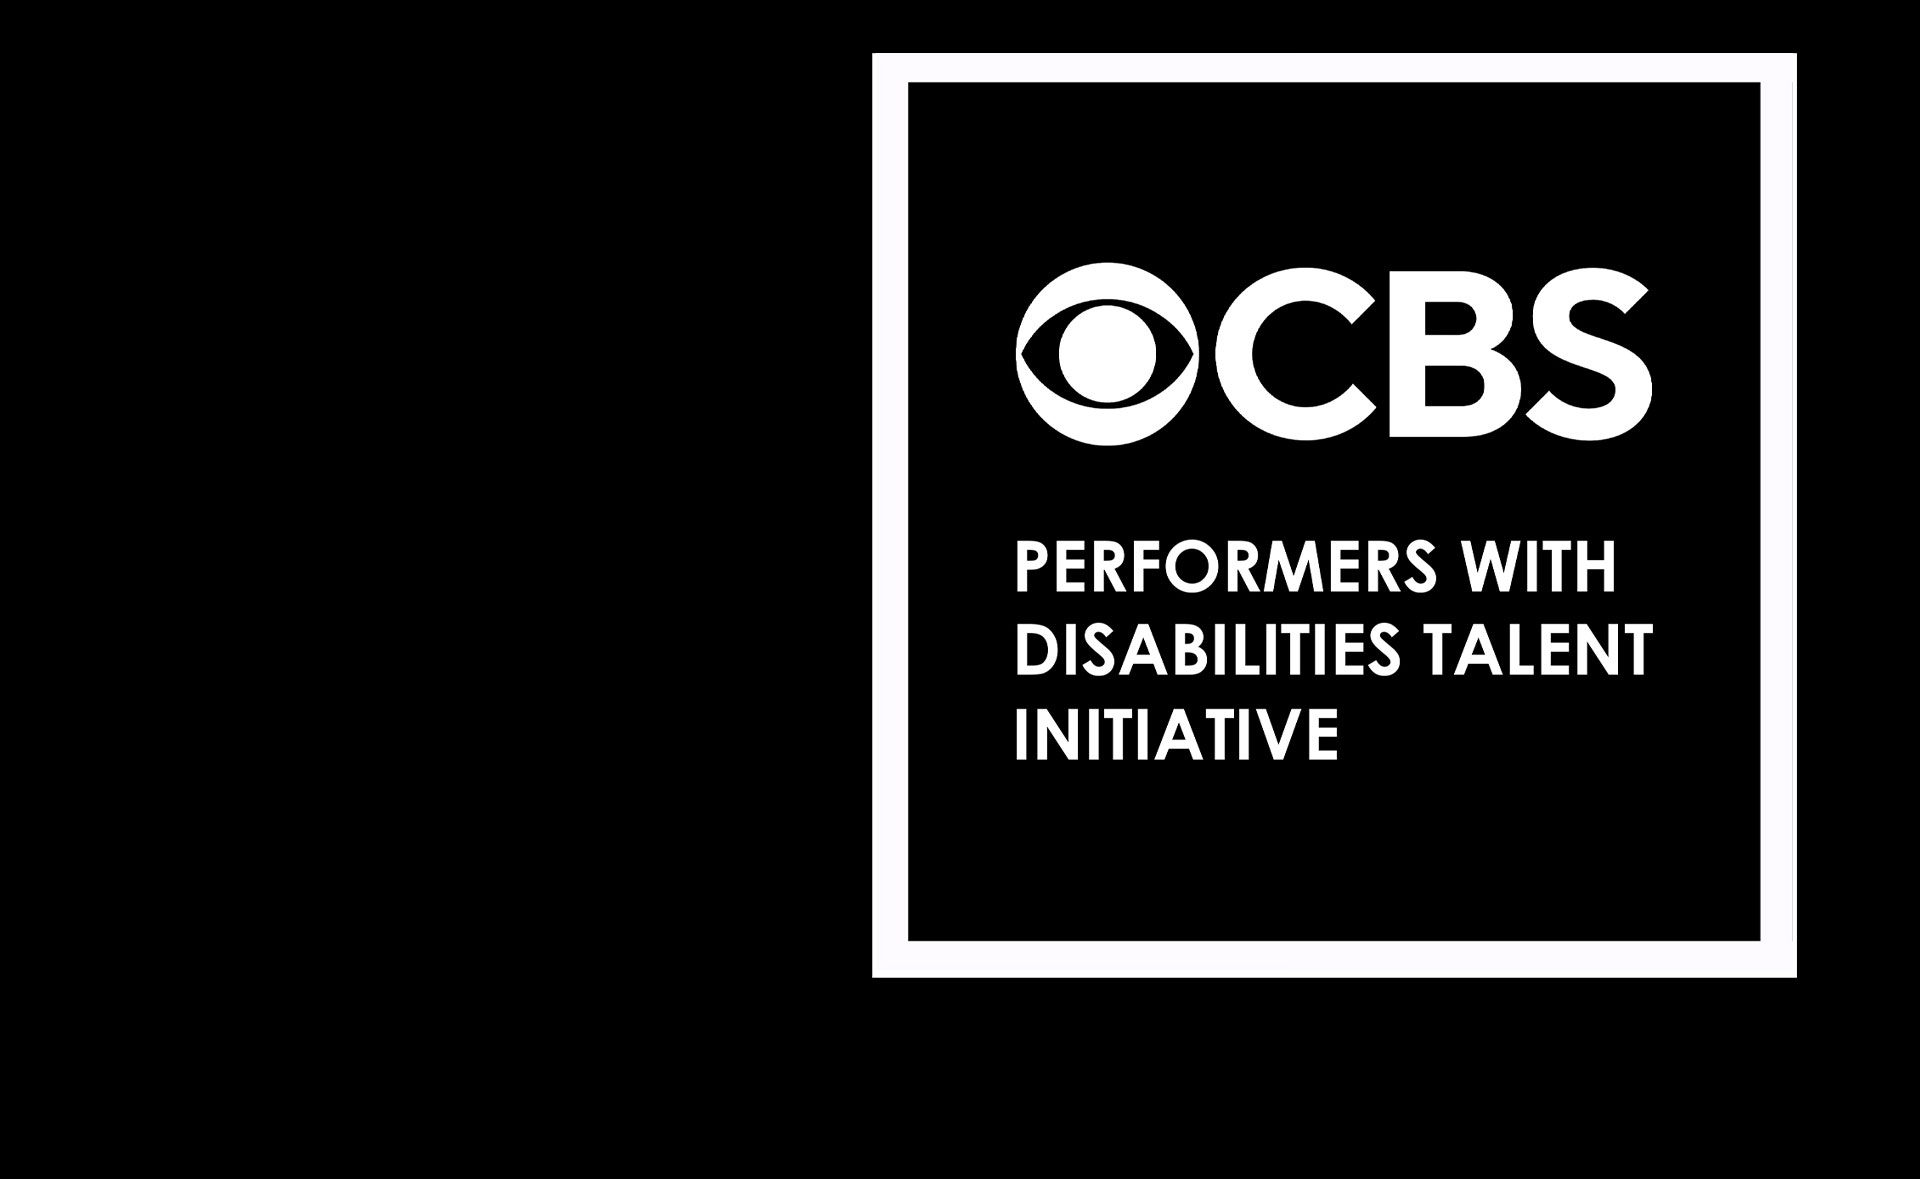 CBS Performers with Disabilities Initiative